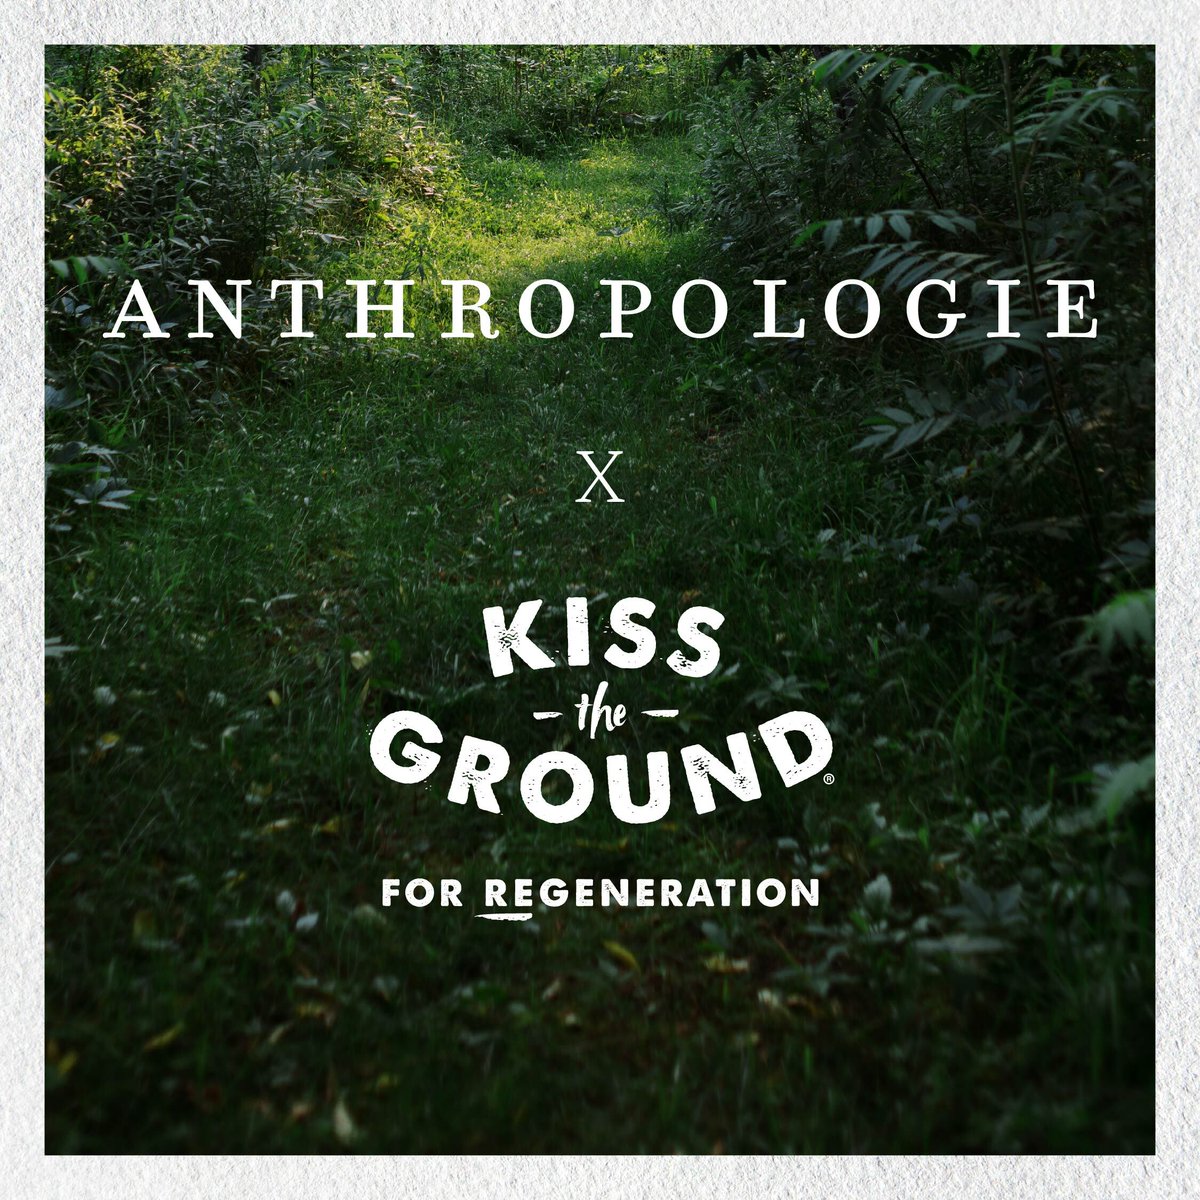 💚 We are excited to announce that @Anthropologie, a global lifestyle brand, is our newest 10k Acre Partner! Their generous contribution will help to inspire and catalyze the transition of 10,000 acres of land into regenerative. 🔎 Learn more kisstheground.com/partnerships/